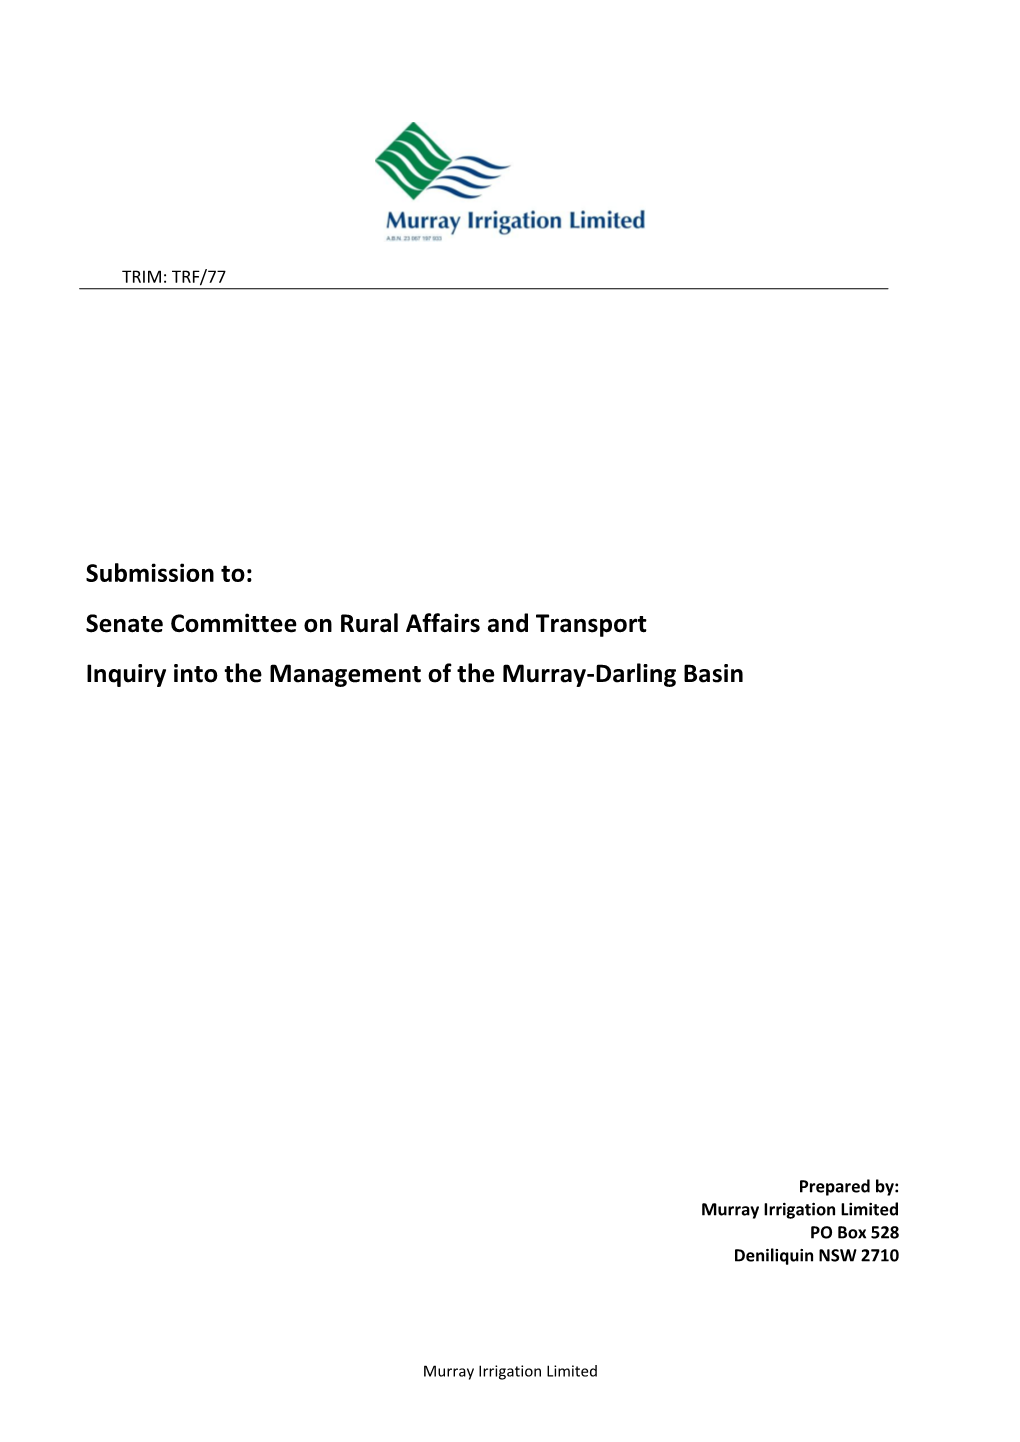 Senate Committee on Rural Affairs and Transport Inquiry Into the Management of the Murray-Darling Basin